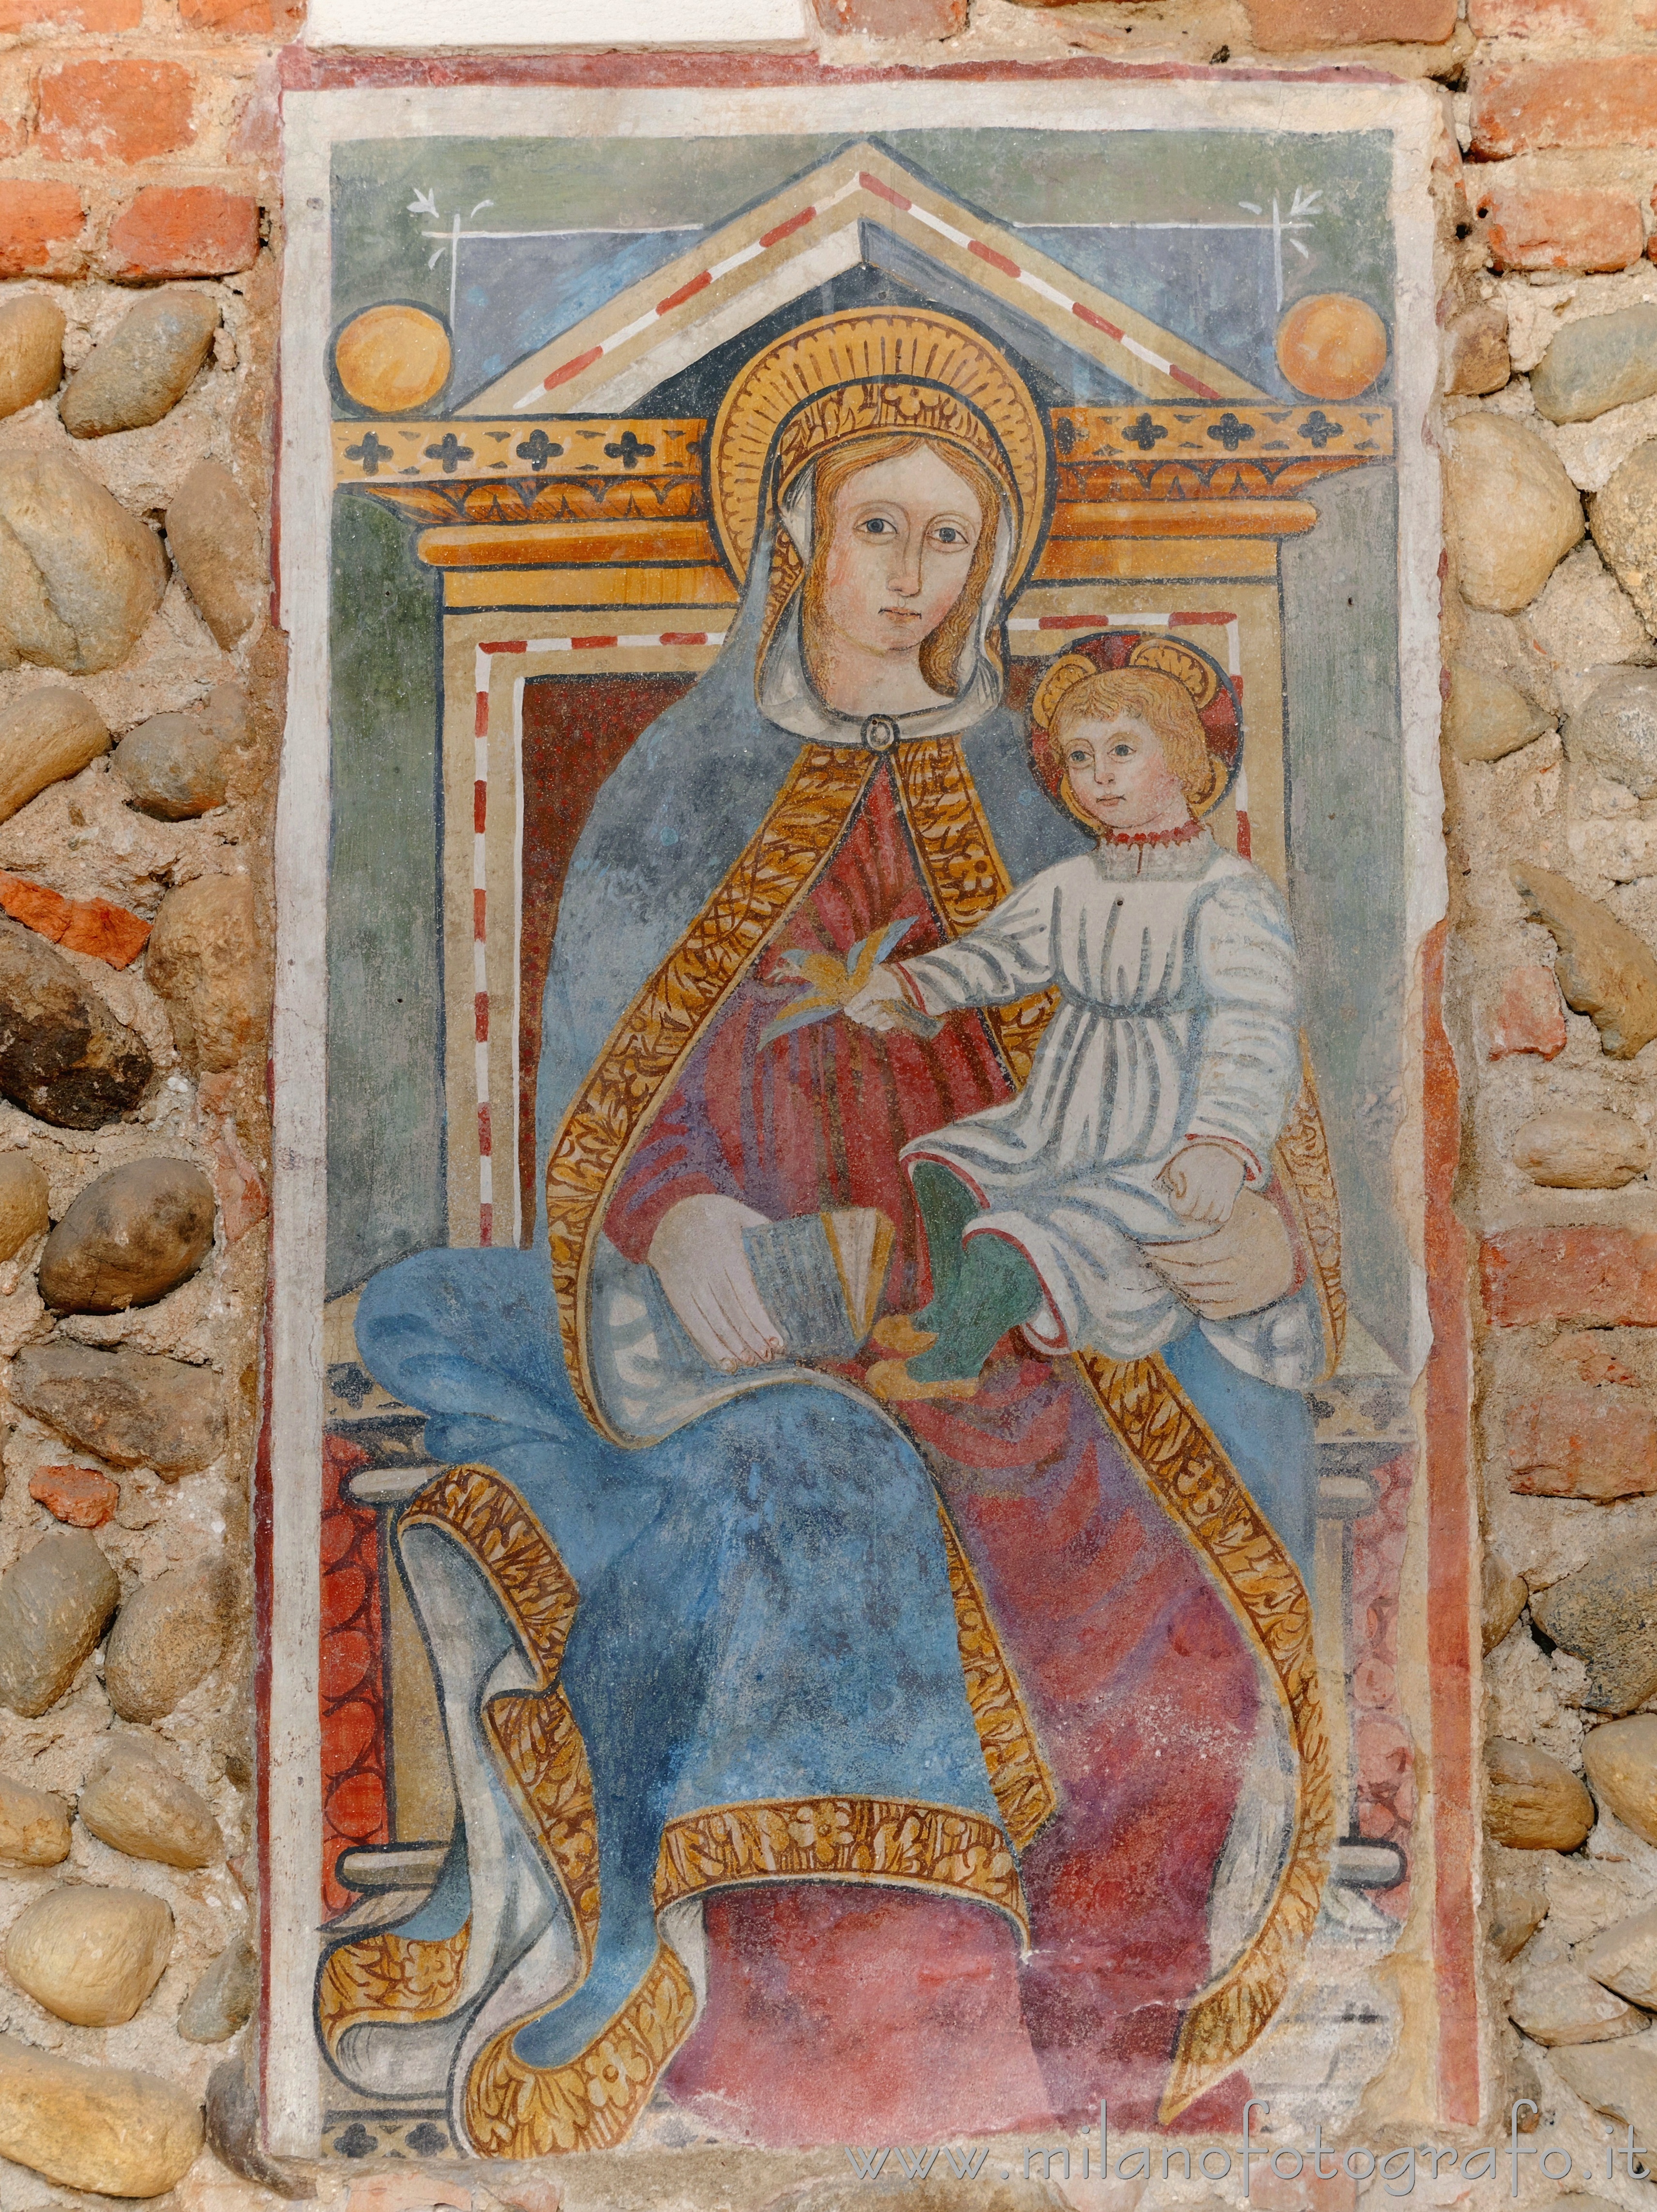 Sandigliano (Biella, Italy): Enthroned Madonna with Child in the Oratory of St. Anthony Abbot - Sandigliano (Biella, Italy)